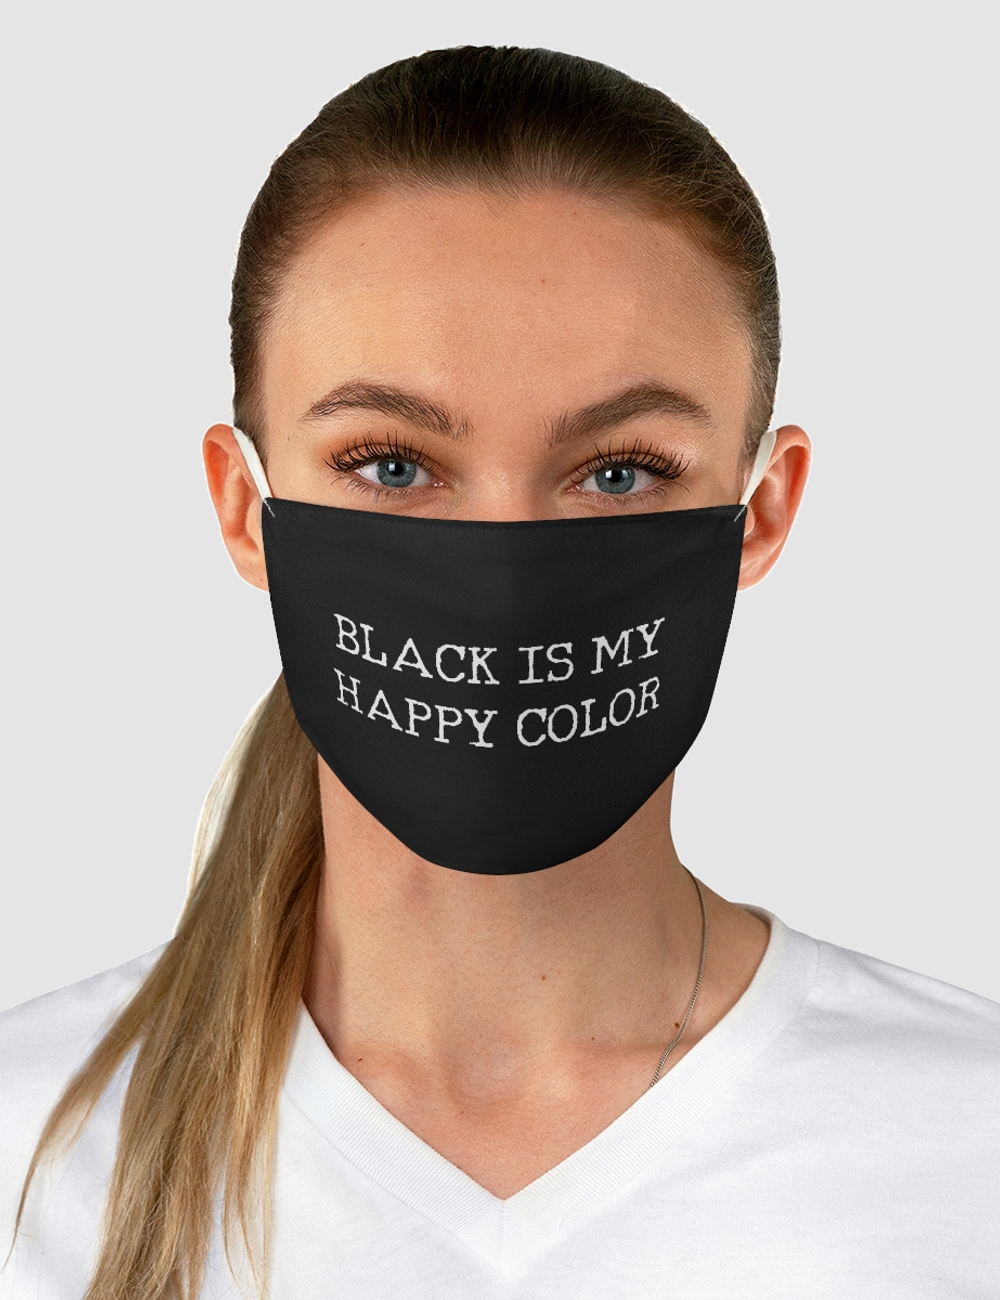 Black Is My Happy Color | Fabric Face Mask OniTakai